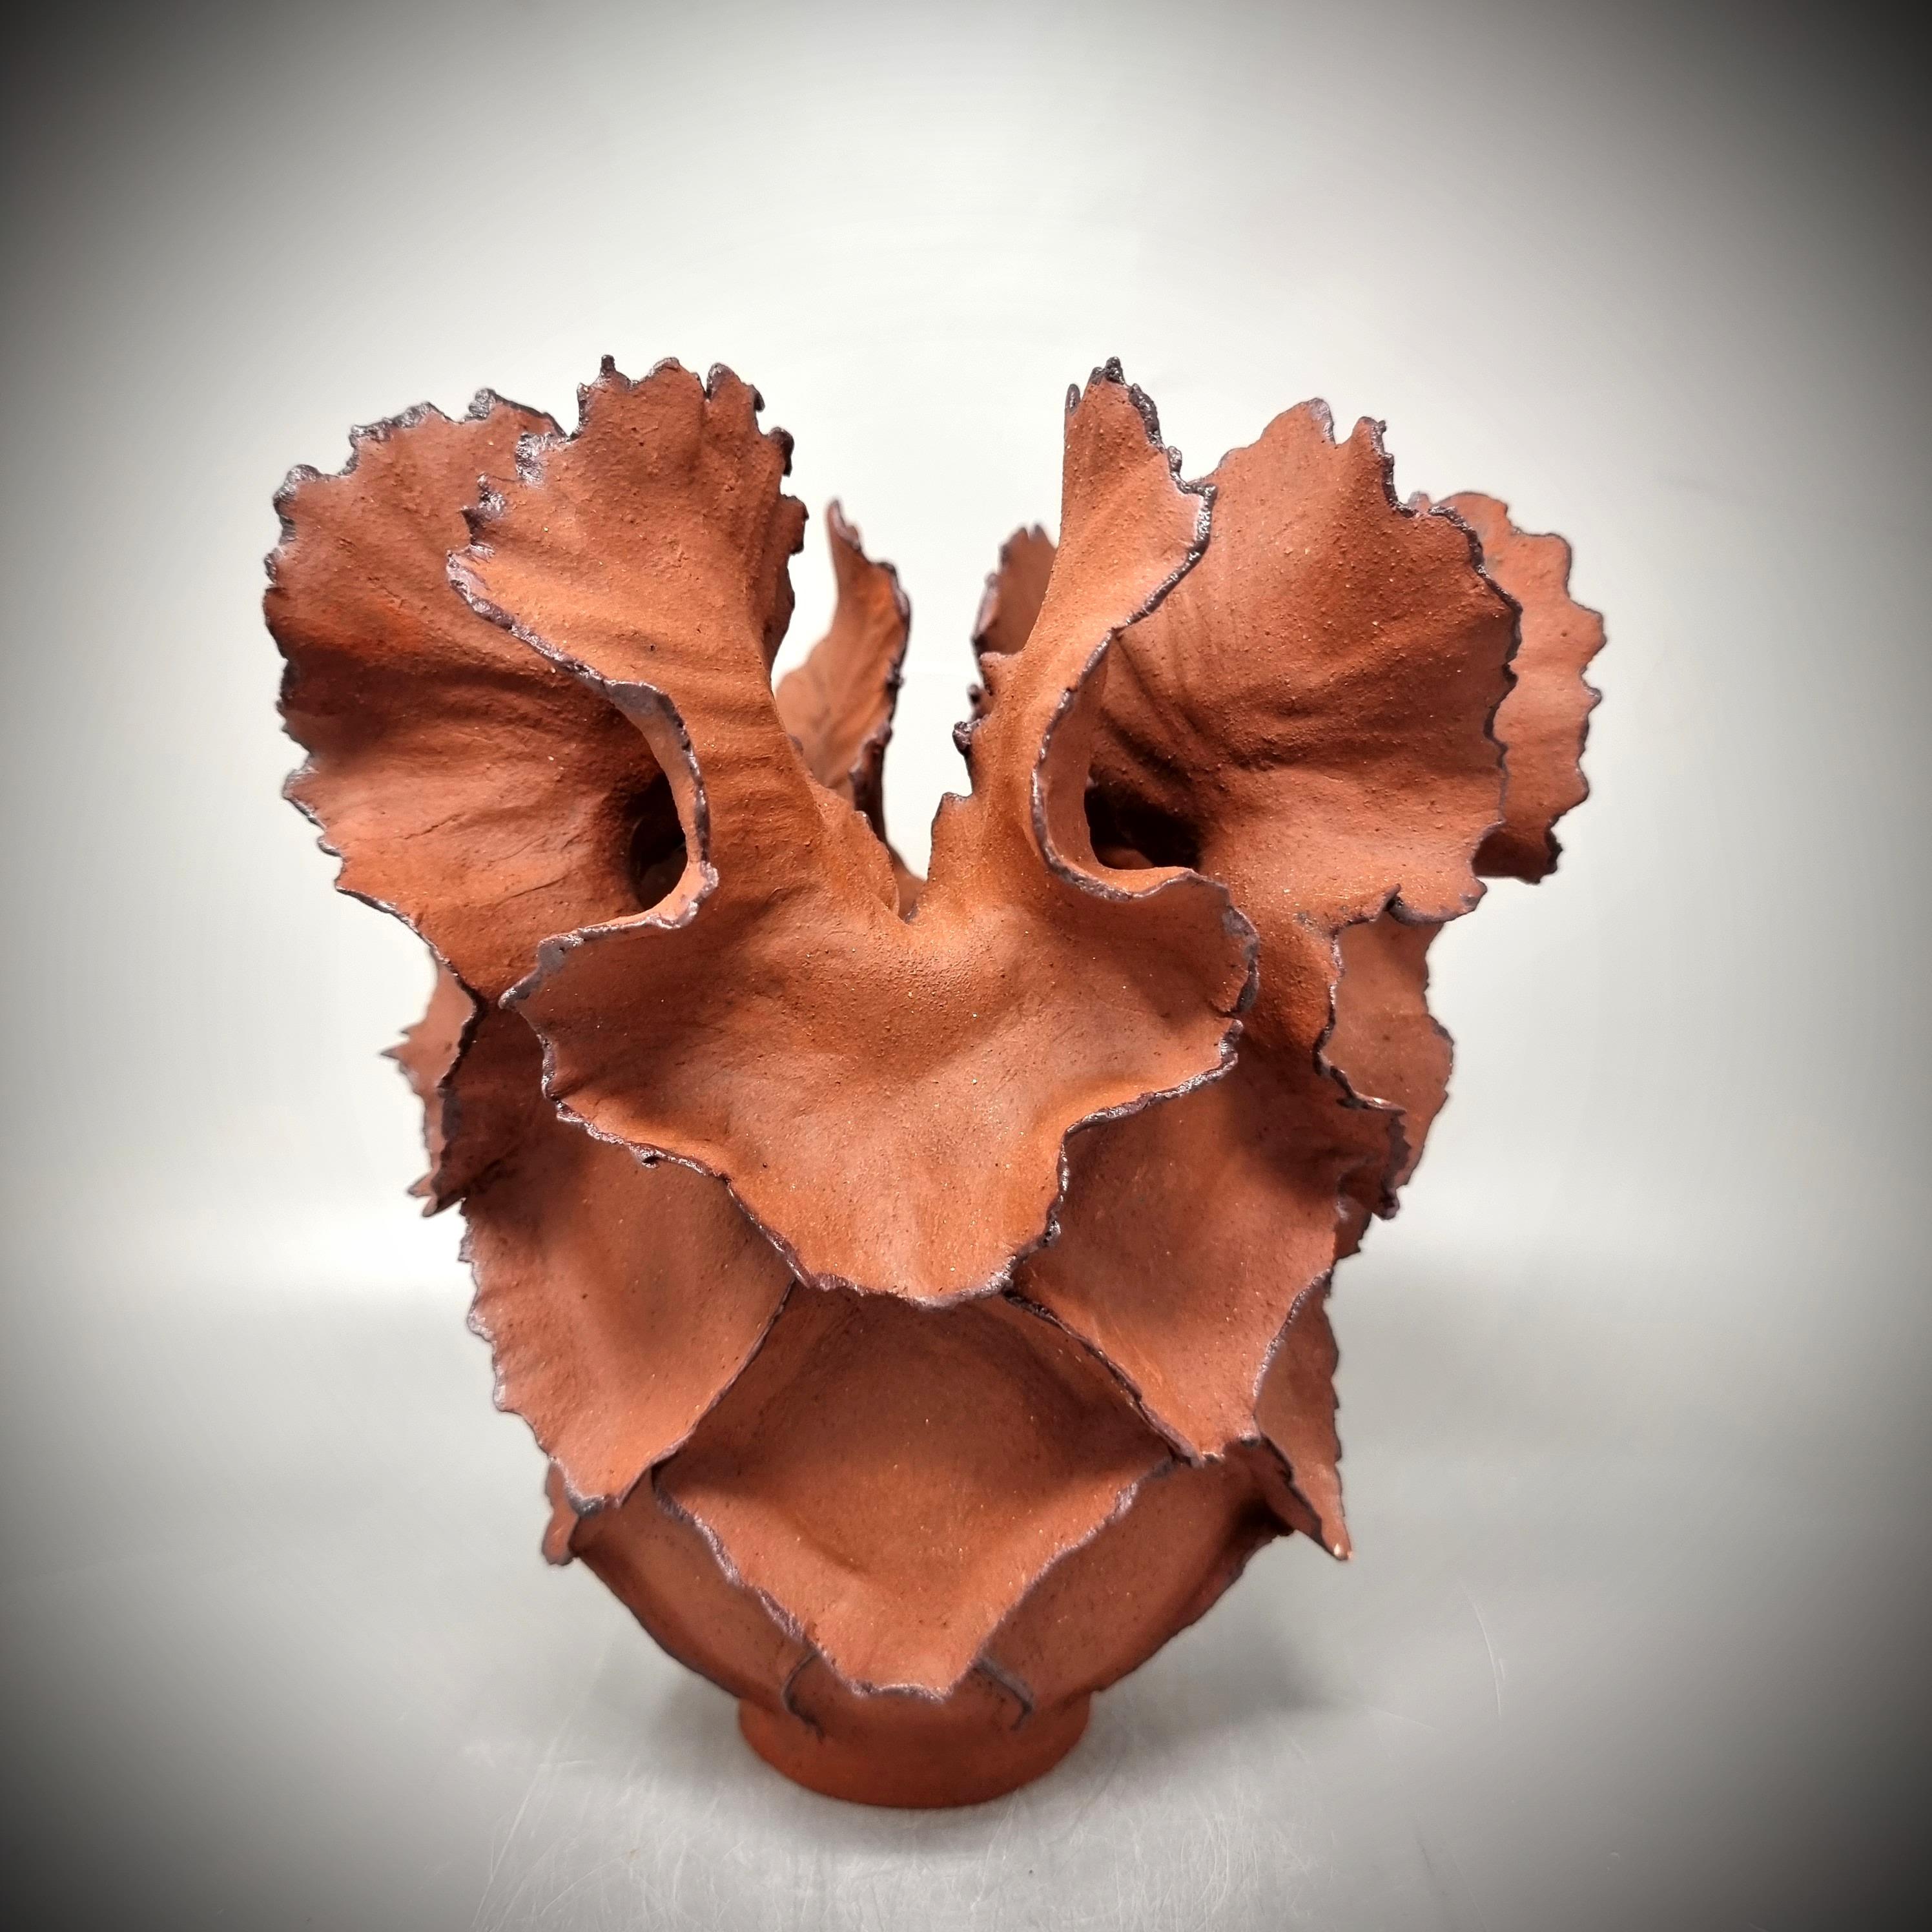 Handbuilt Stonewear Sculpture in red/braun stonewear clay

It is sculpted by hand, slowly adding coils and clay to create the final result. This is a piece of art based on classic sculpting methods. 
 
The color of the sculpture hcanges